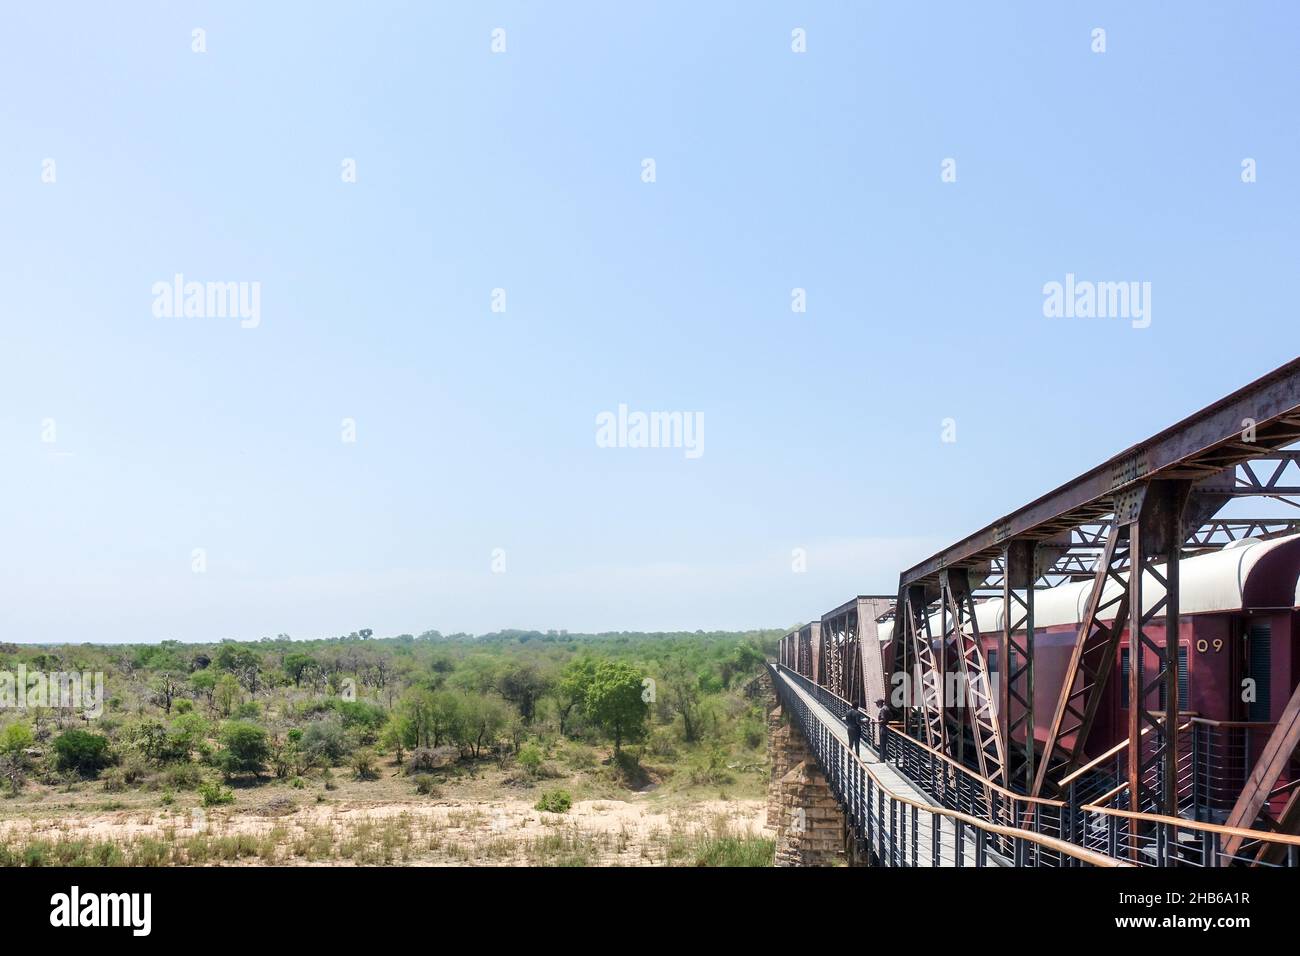 Old train, converted into a luxury lodge, at Skukuza in the Kruger National Park, South Africa Stock Photo